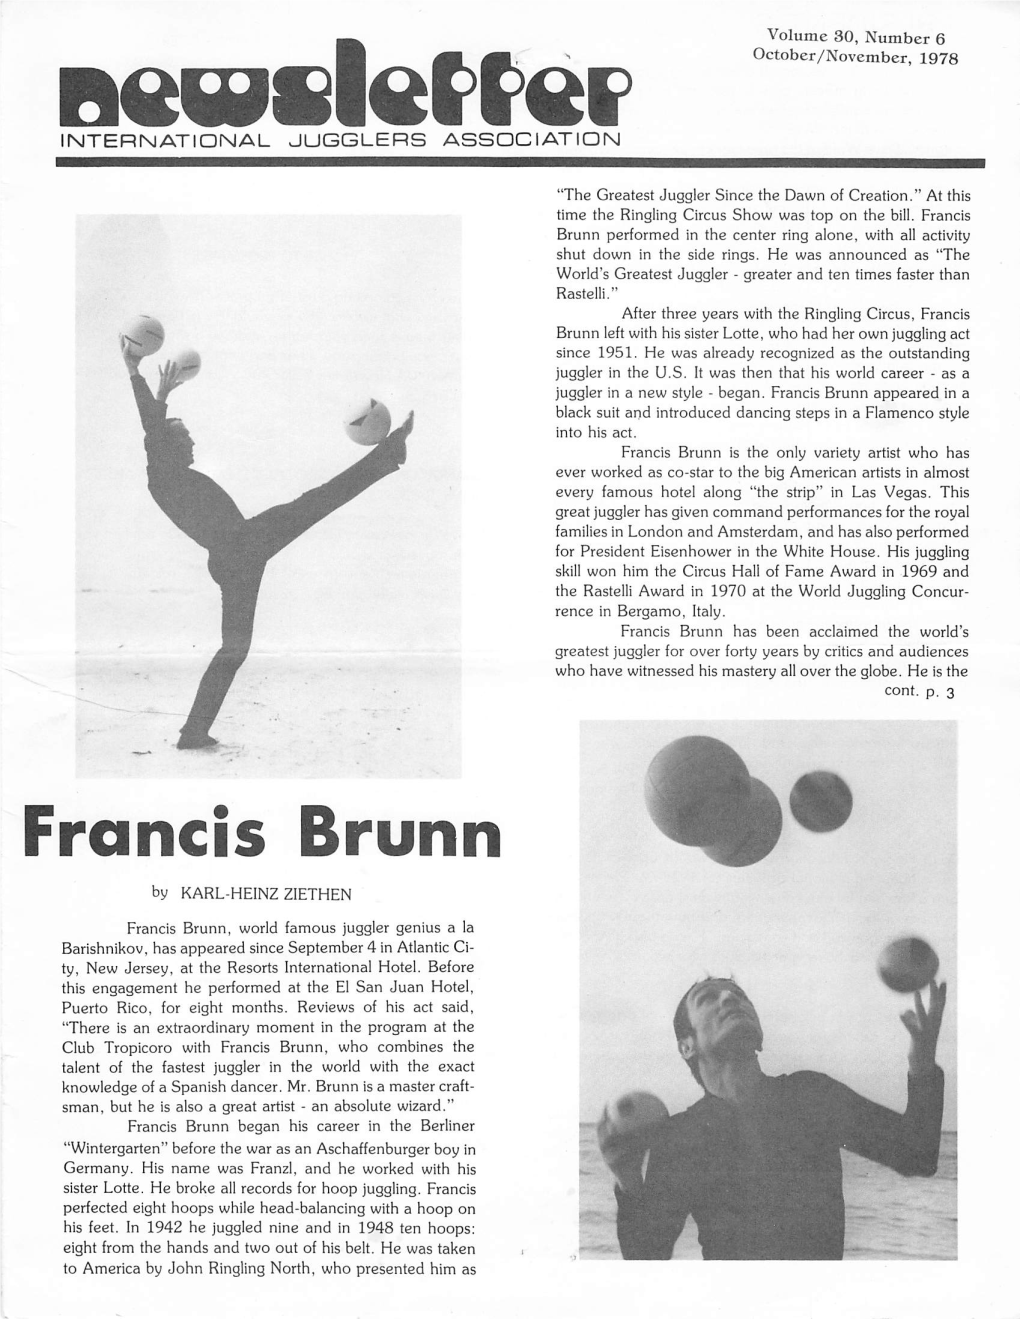 Francis Brunn Performed in the Center Ring Alone, with All Activity Shut Down in the Side Rings